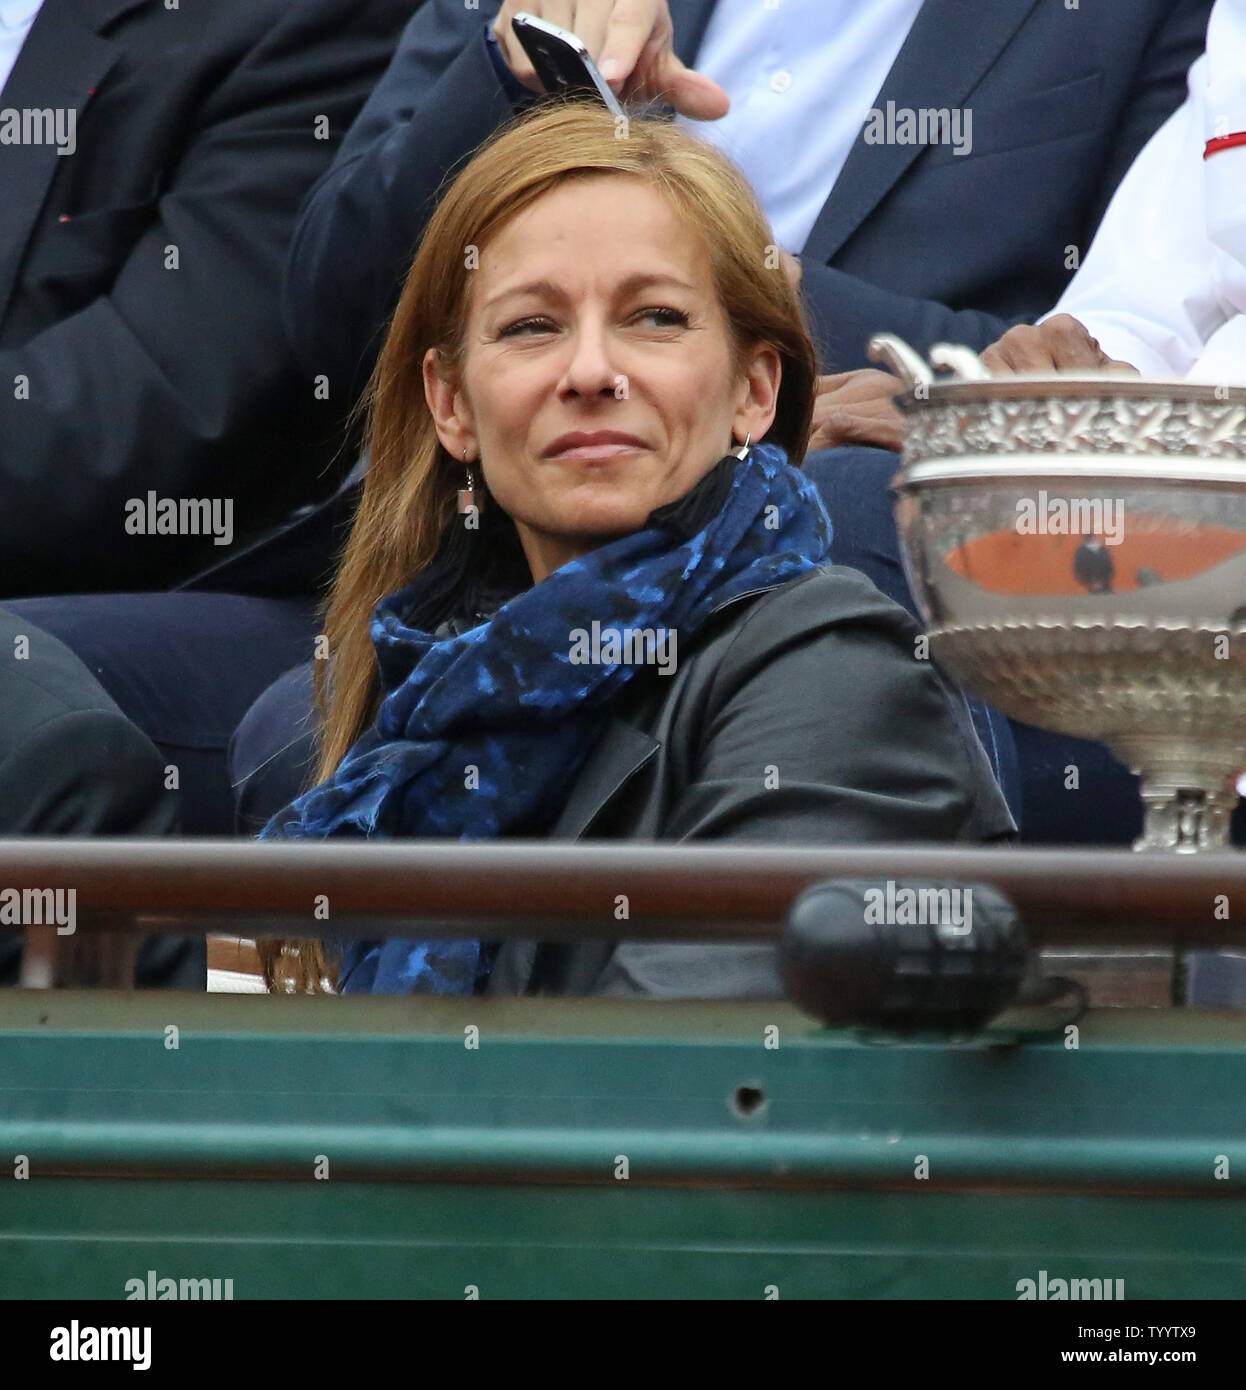 Anne Gravoin watches the French Open men's final match between Andy Murray of the United Kingdom and Novak Djokovic at Roland Garros in Paris on June 5, 2016. Djokovic defeated Murray 3-6, 6-1, 6-2, 6-4 to win his first French Open championship and complete his career Grand Slam.   Photo by David Silpa/UPI Stock Photo